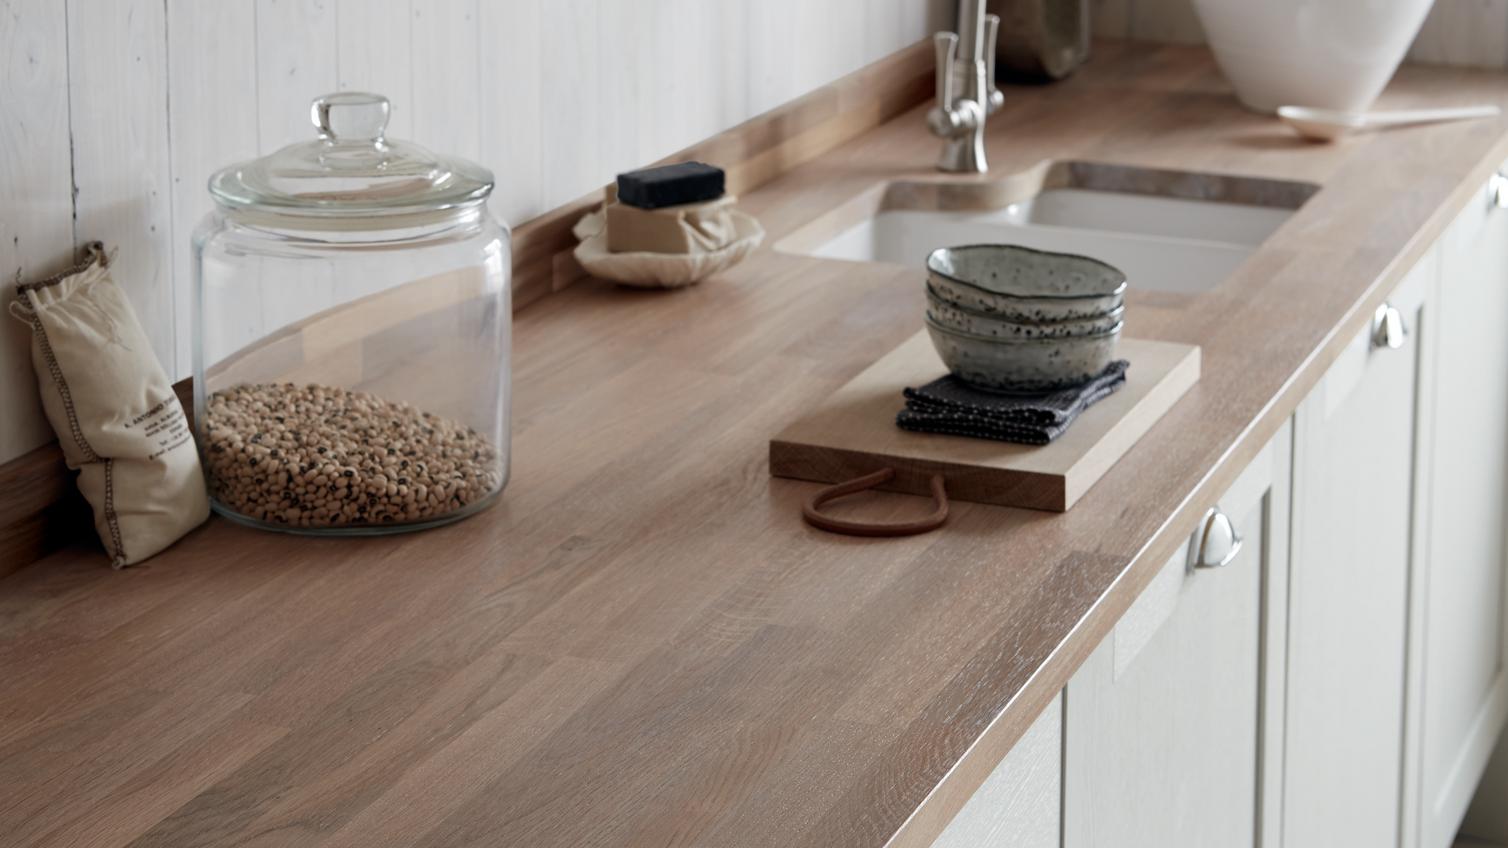 27mm Oak worktop - stained white with 27mm Oak upstand - stained white